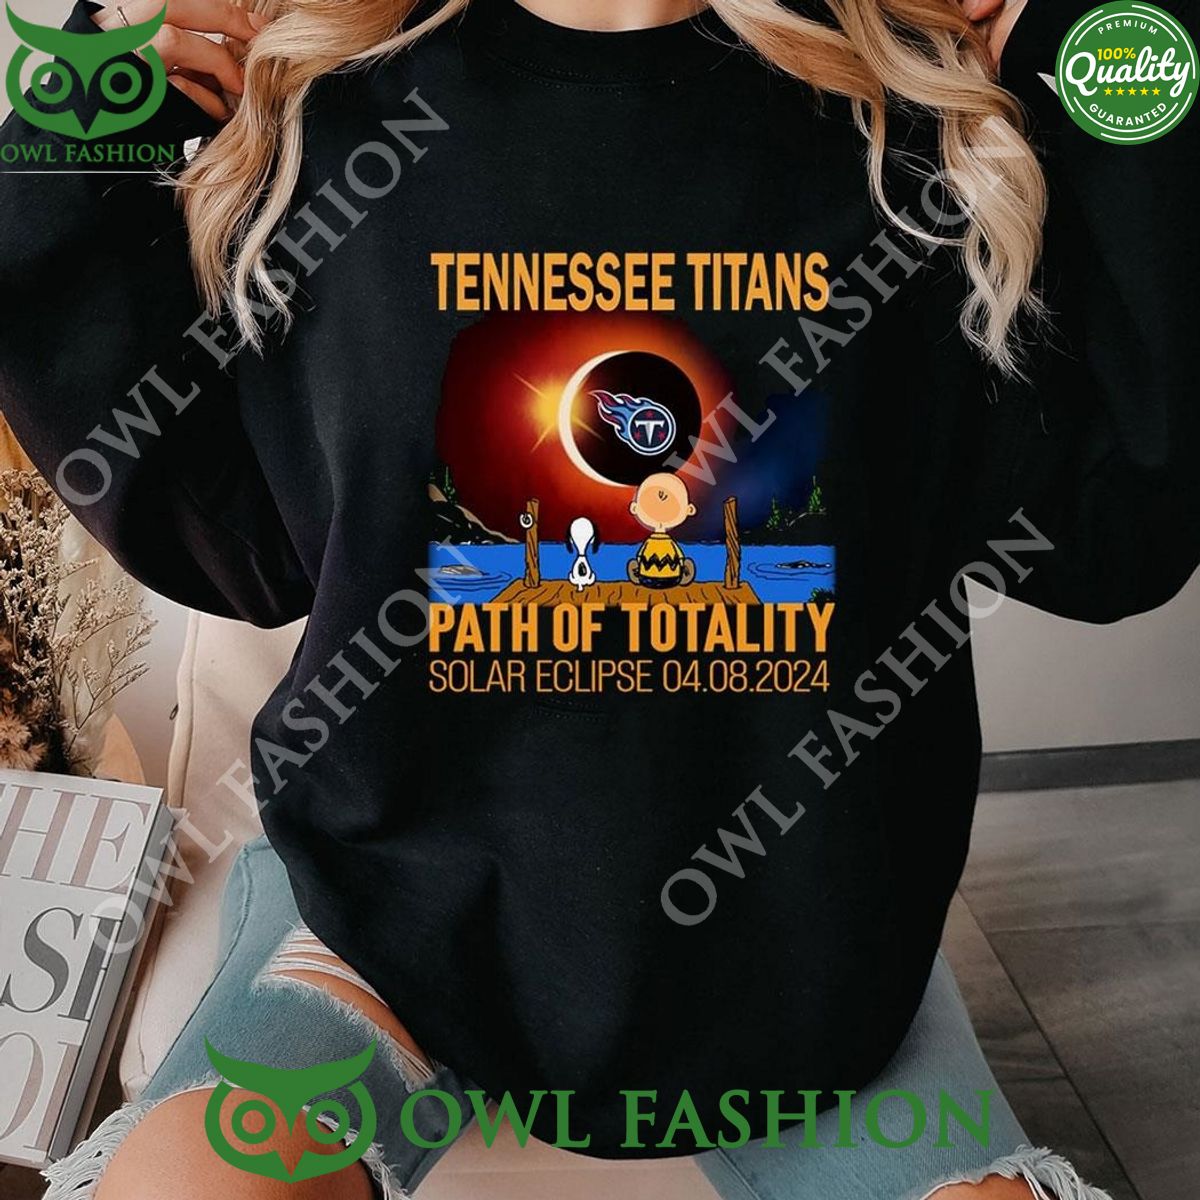 snoopy tennessee titans path of totality solar eclipse 2024 shirt hoodie ladies tee 1 1zf16.jpg